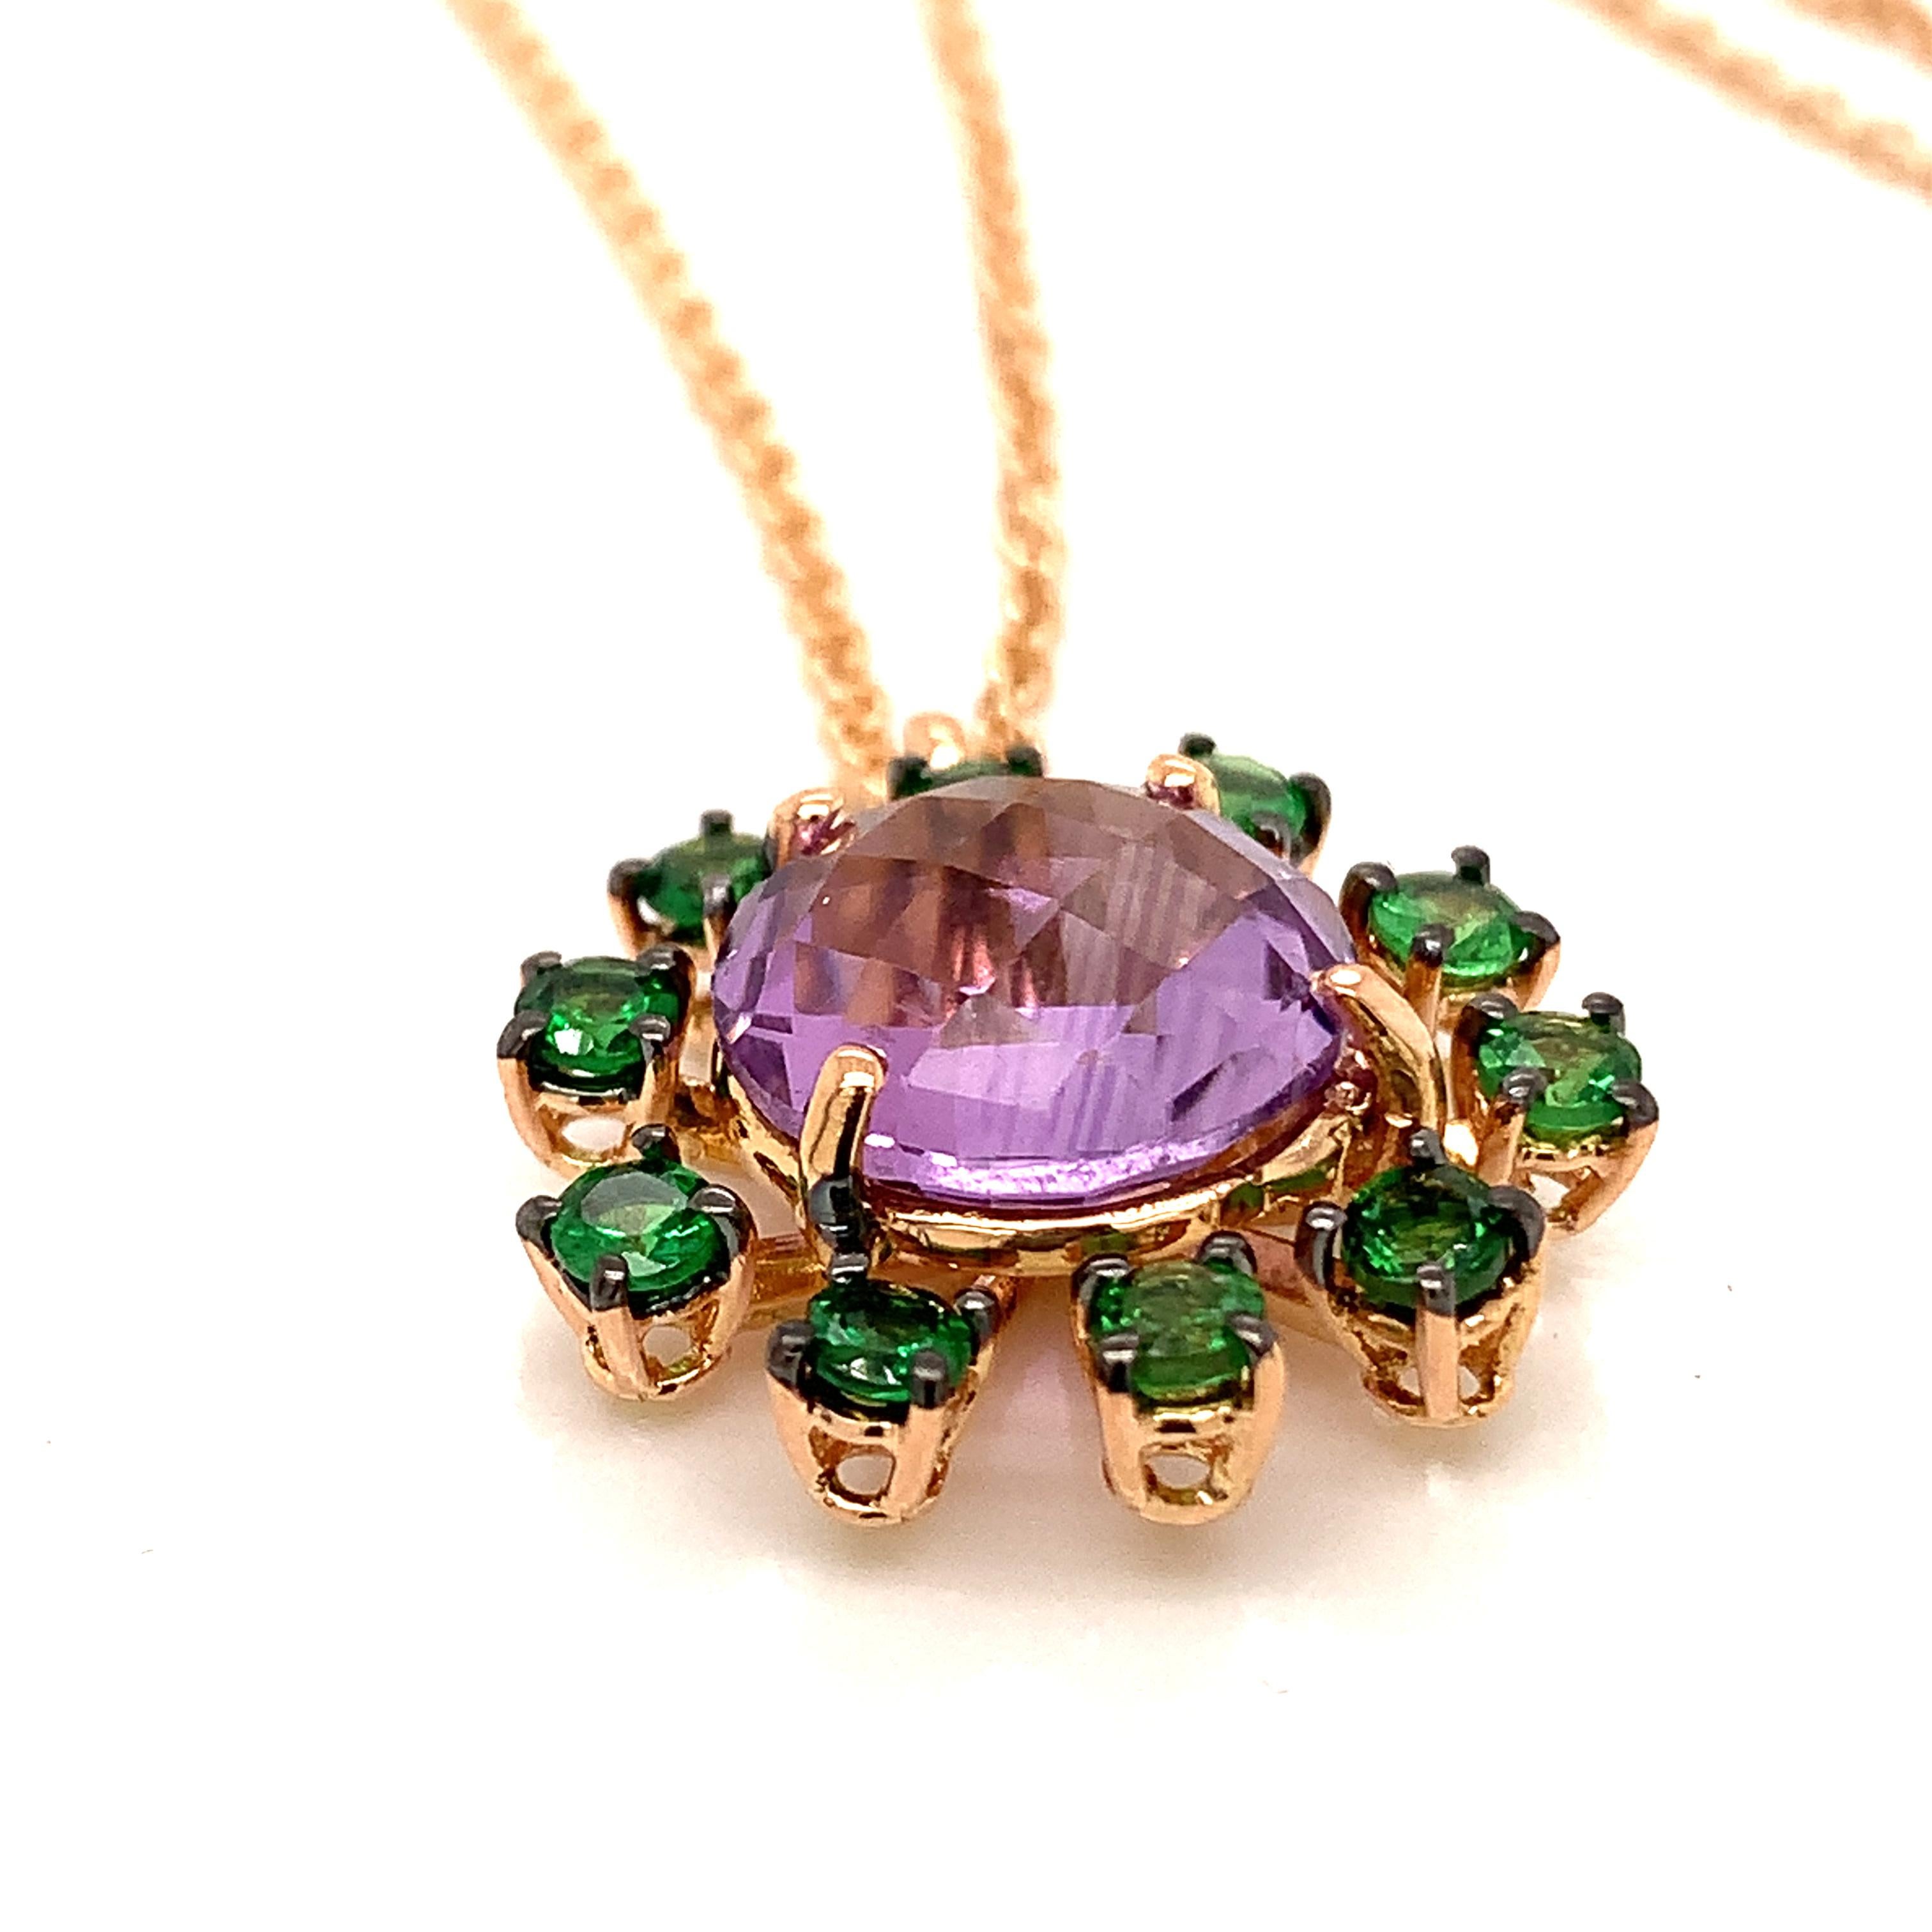 Garavelli pendant with chain , in rose gold 18 kt with Amethyst and Tzavorite - made in Italy
 The total chain lenght is 44 cm / inches 17  with a loop at 40 cm /15.5 inches
18kt GOLD grs : 6.30
Round multifaceted natural amethyst ct 3.10 diameter